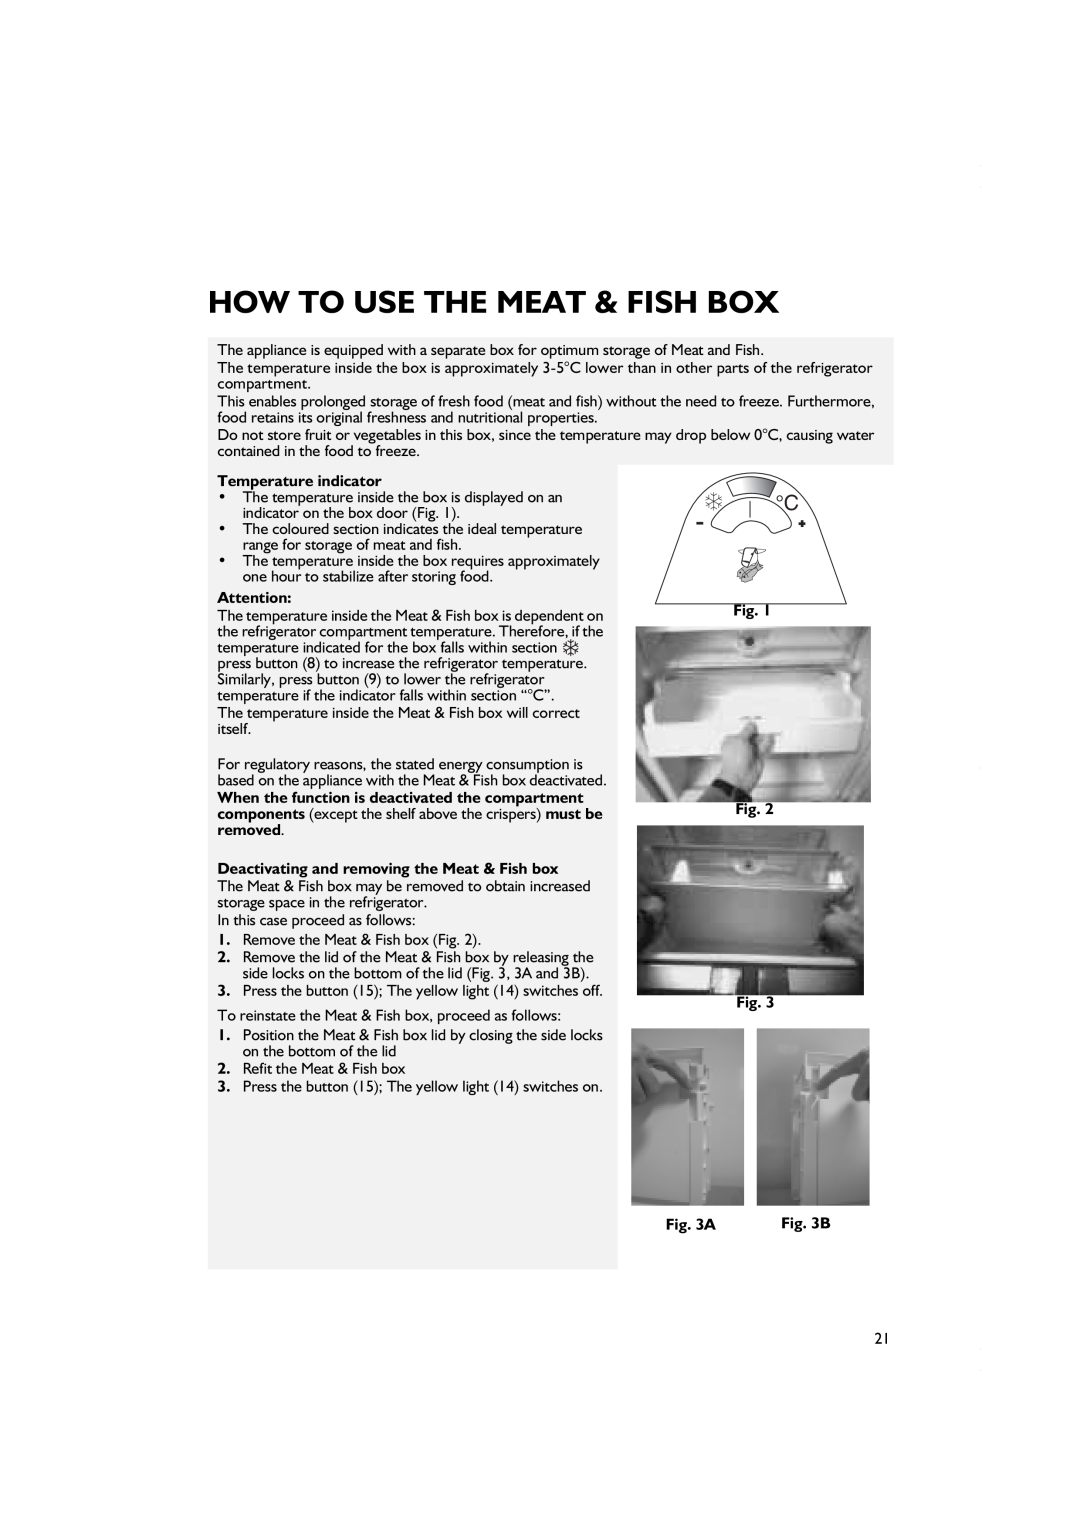 Smeg CR328AZD7 manual How To Use The Meat & Fish Box, Temperature indicator, Deactivating and removing the Meat & Fish box 